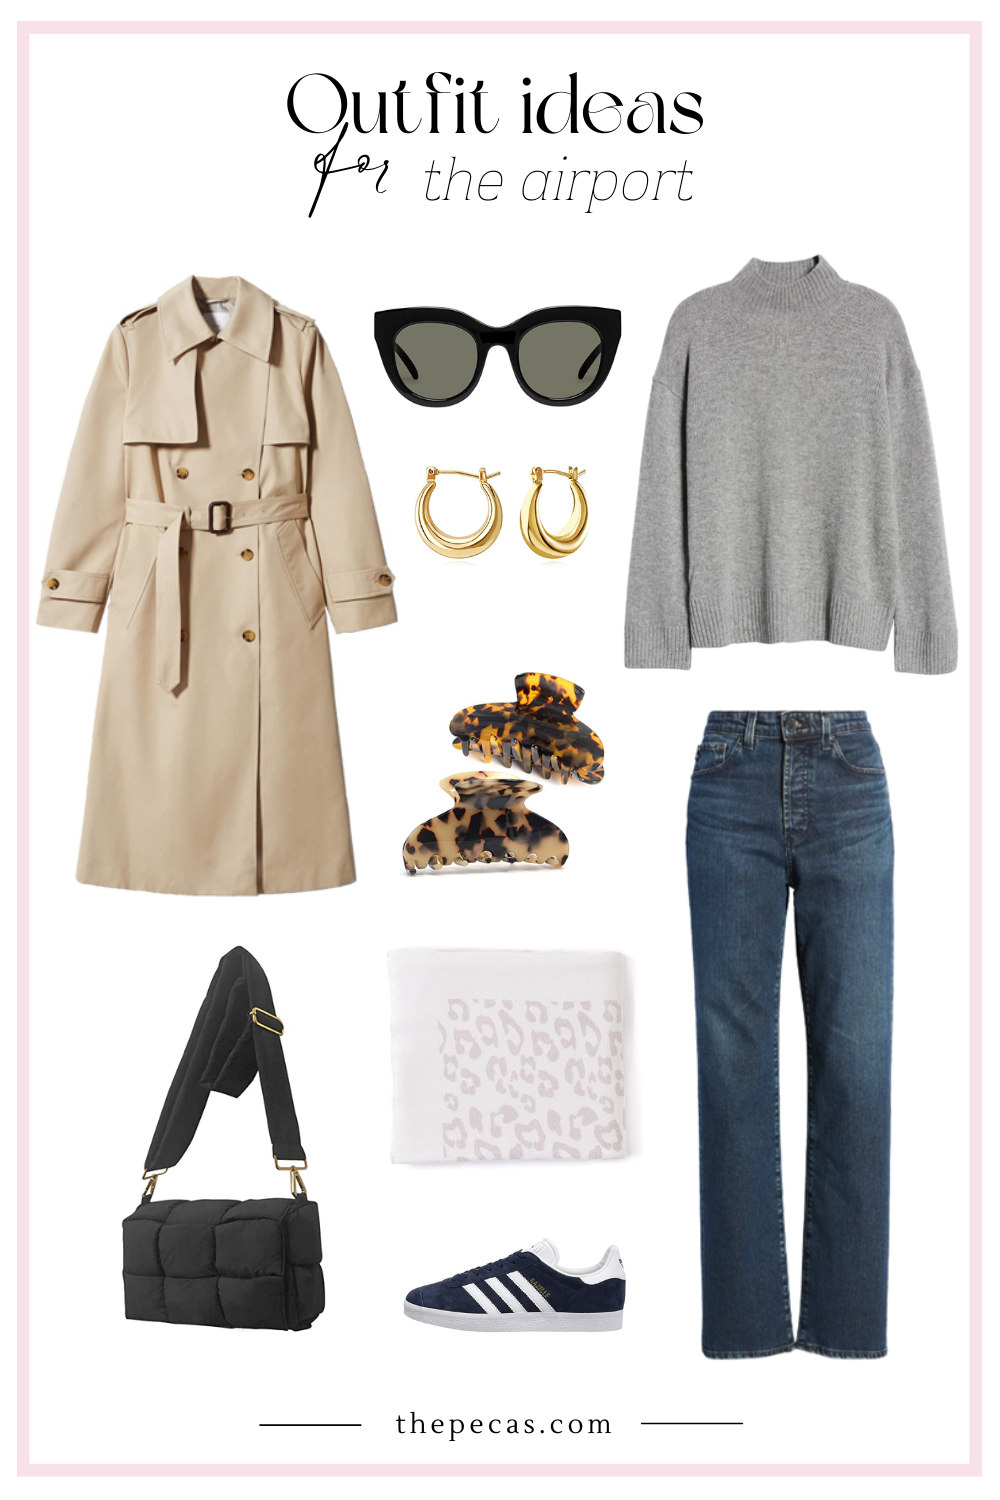 Fashion Friday – Airport outfit ideas